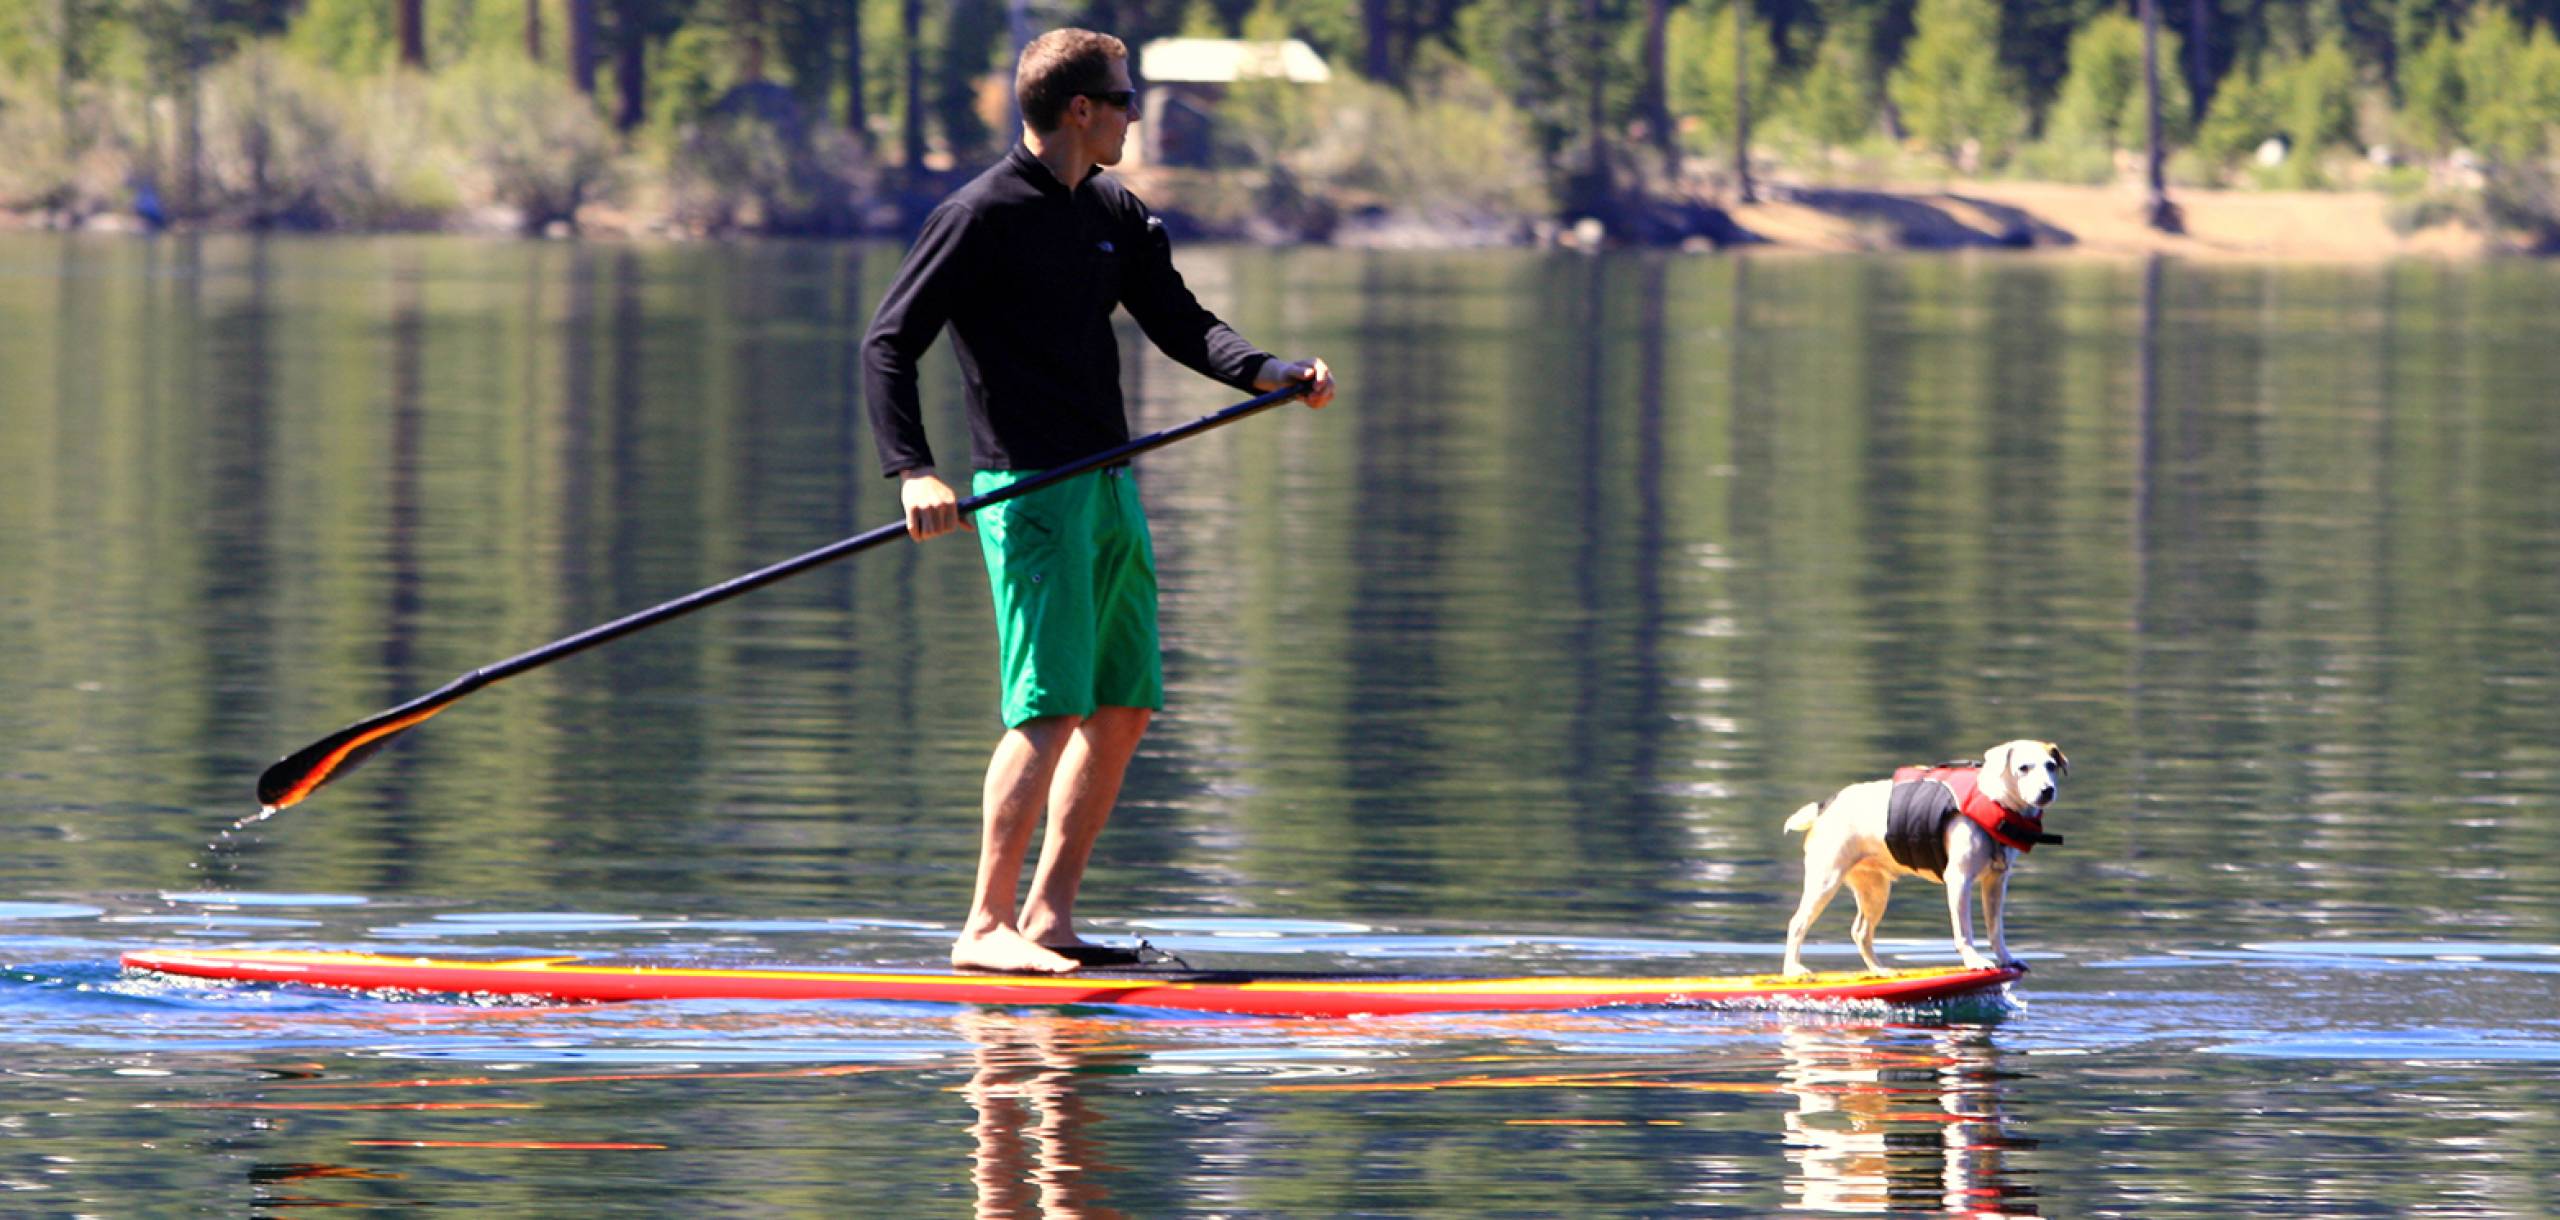 are dogs allowed at donner lake